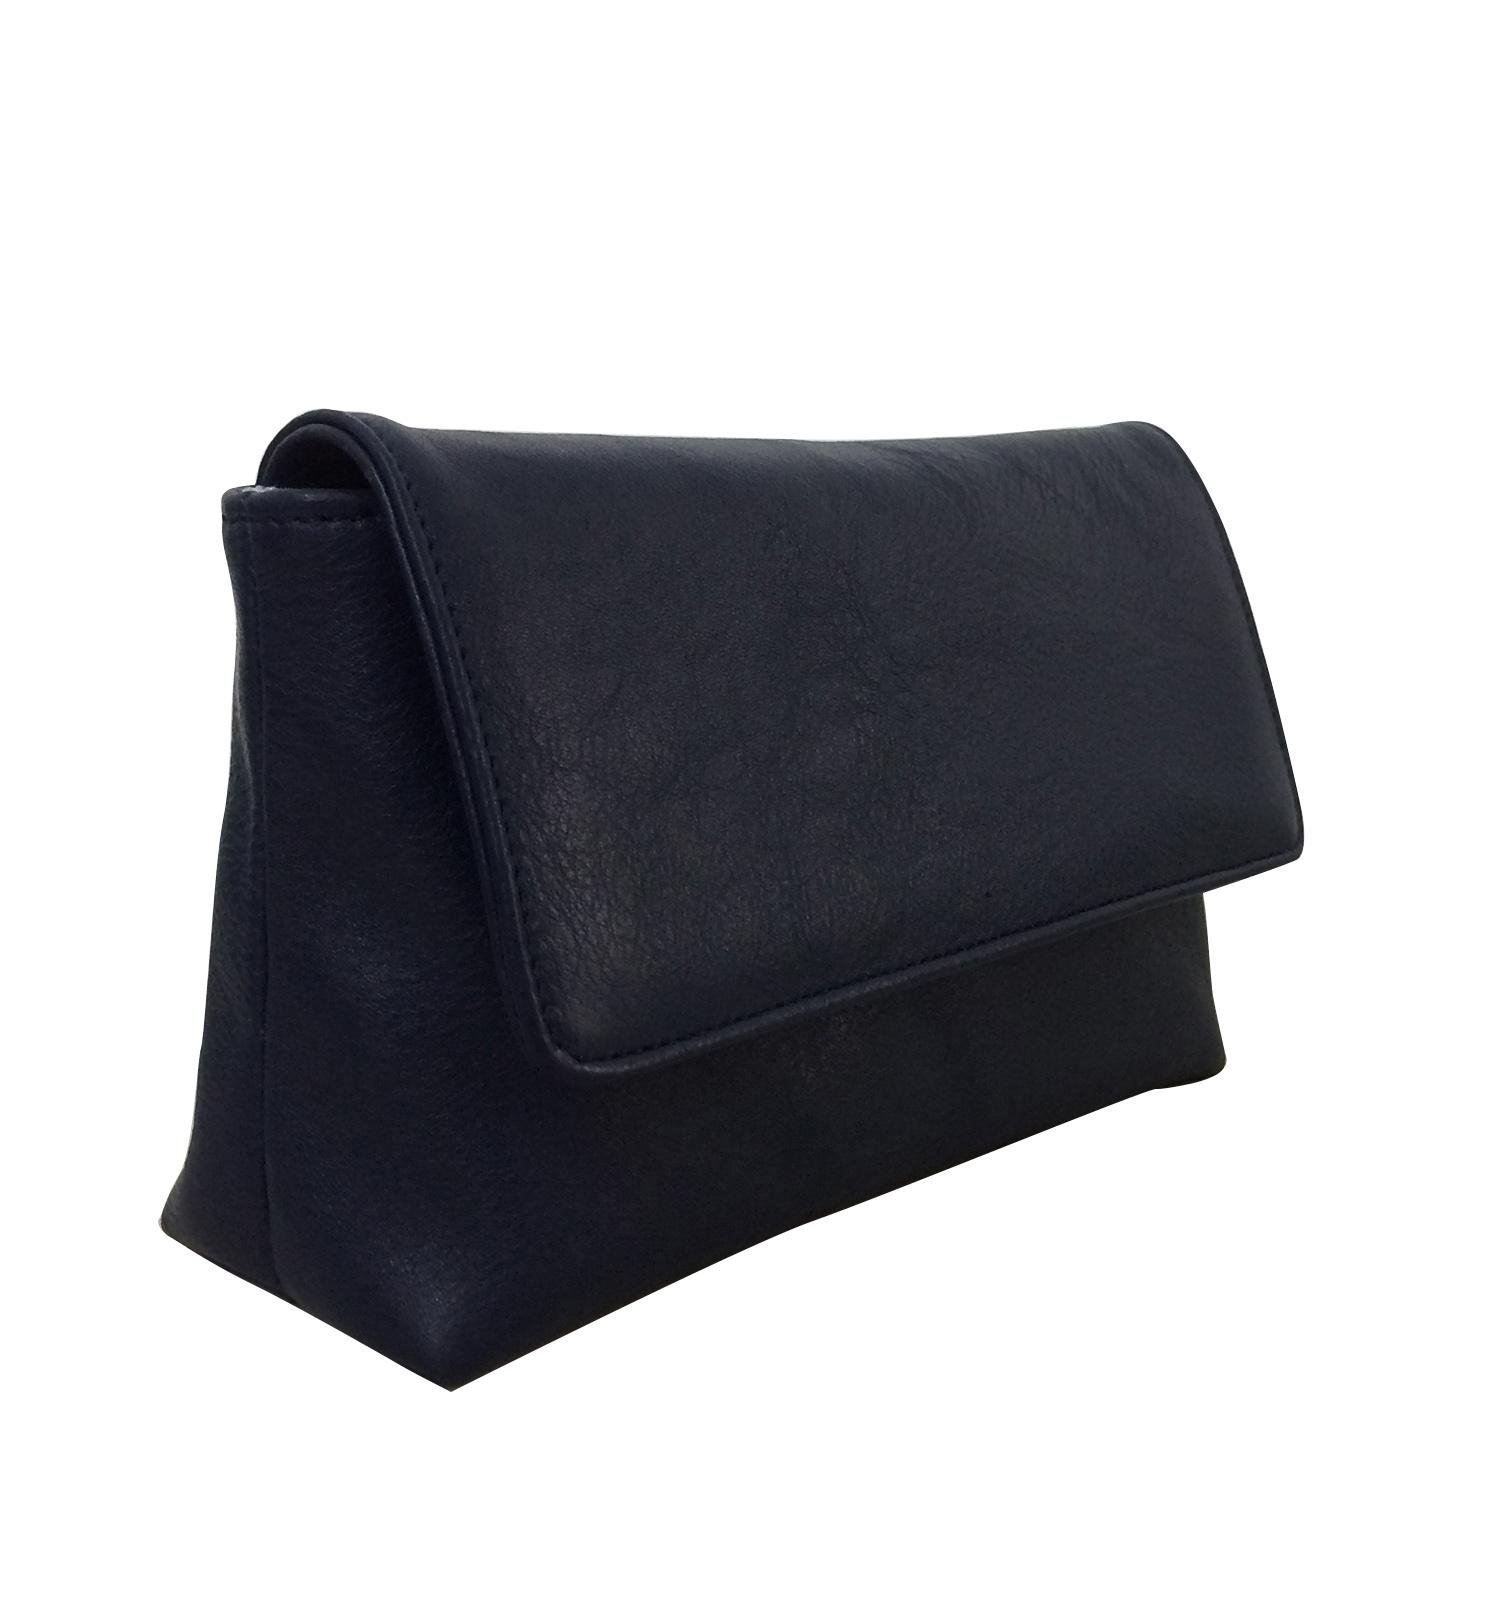 Genuine leather women purse in navy blue with flap - K1415 - No Brand ...